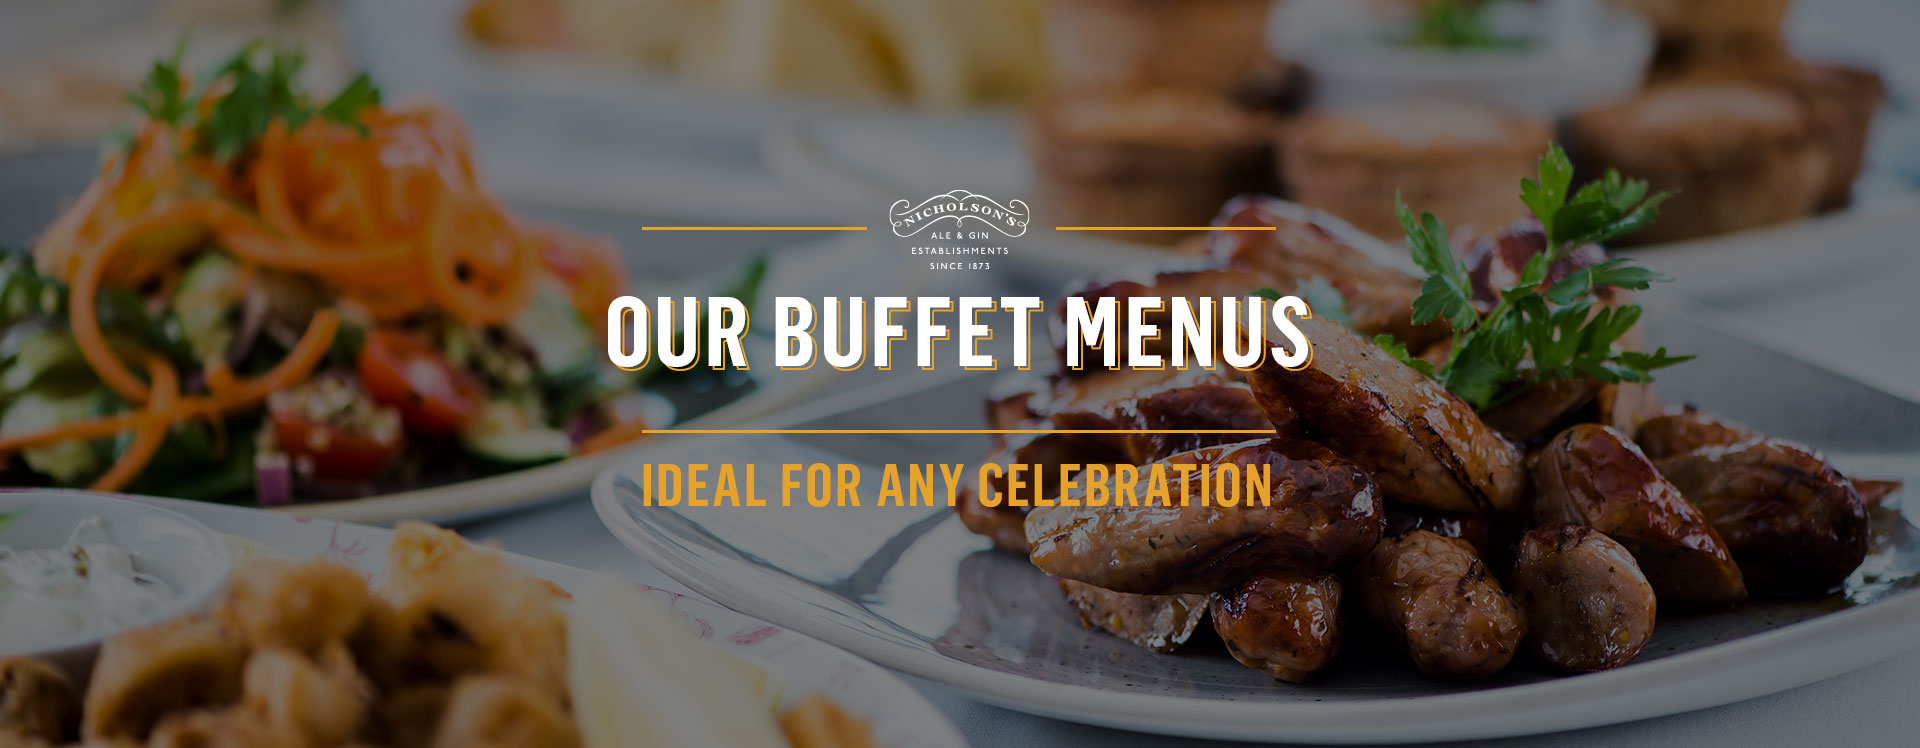 Buffet menu at The Philharmonic Dining Rooms - Book a table